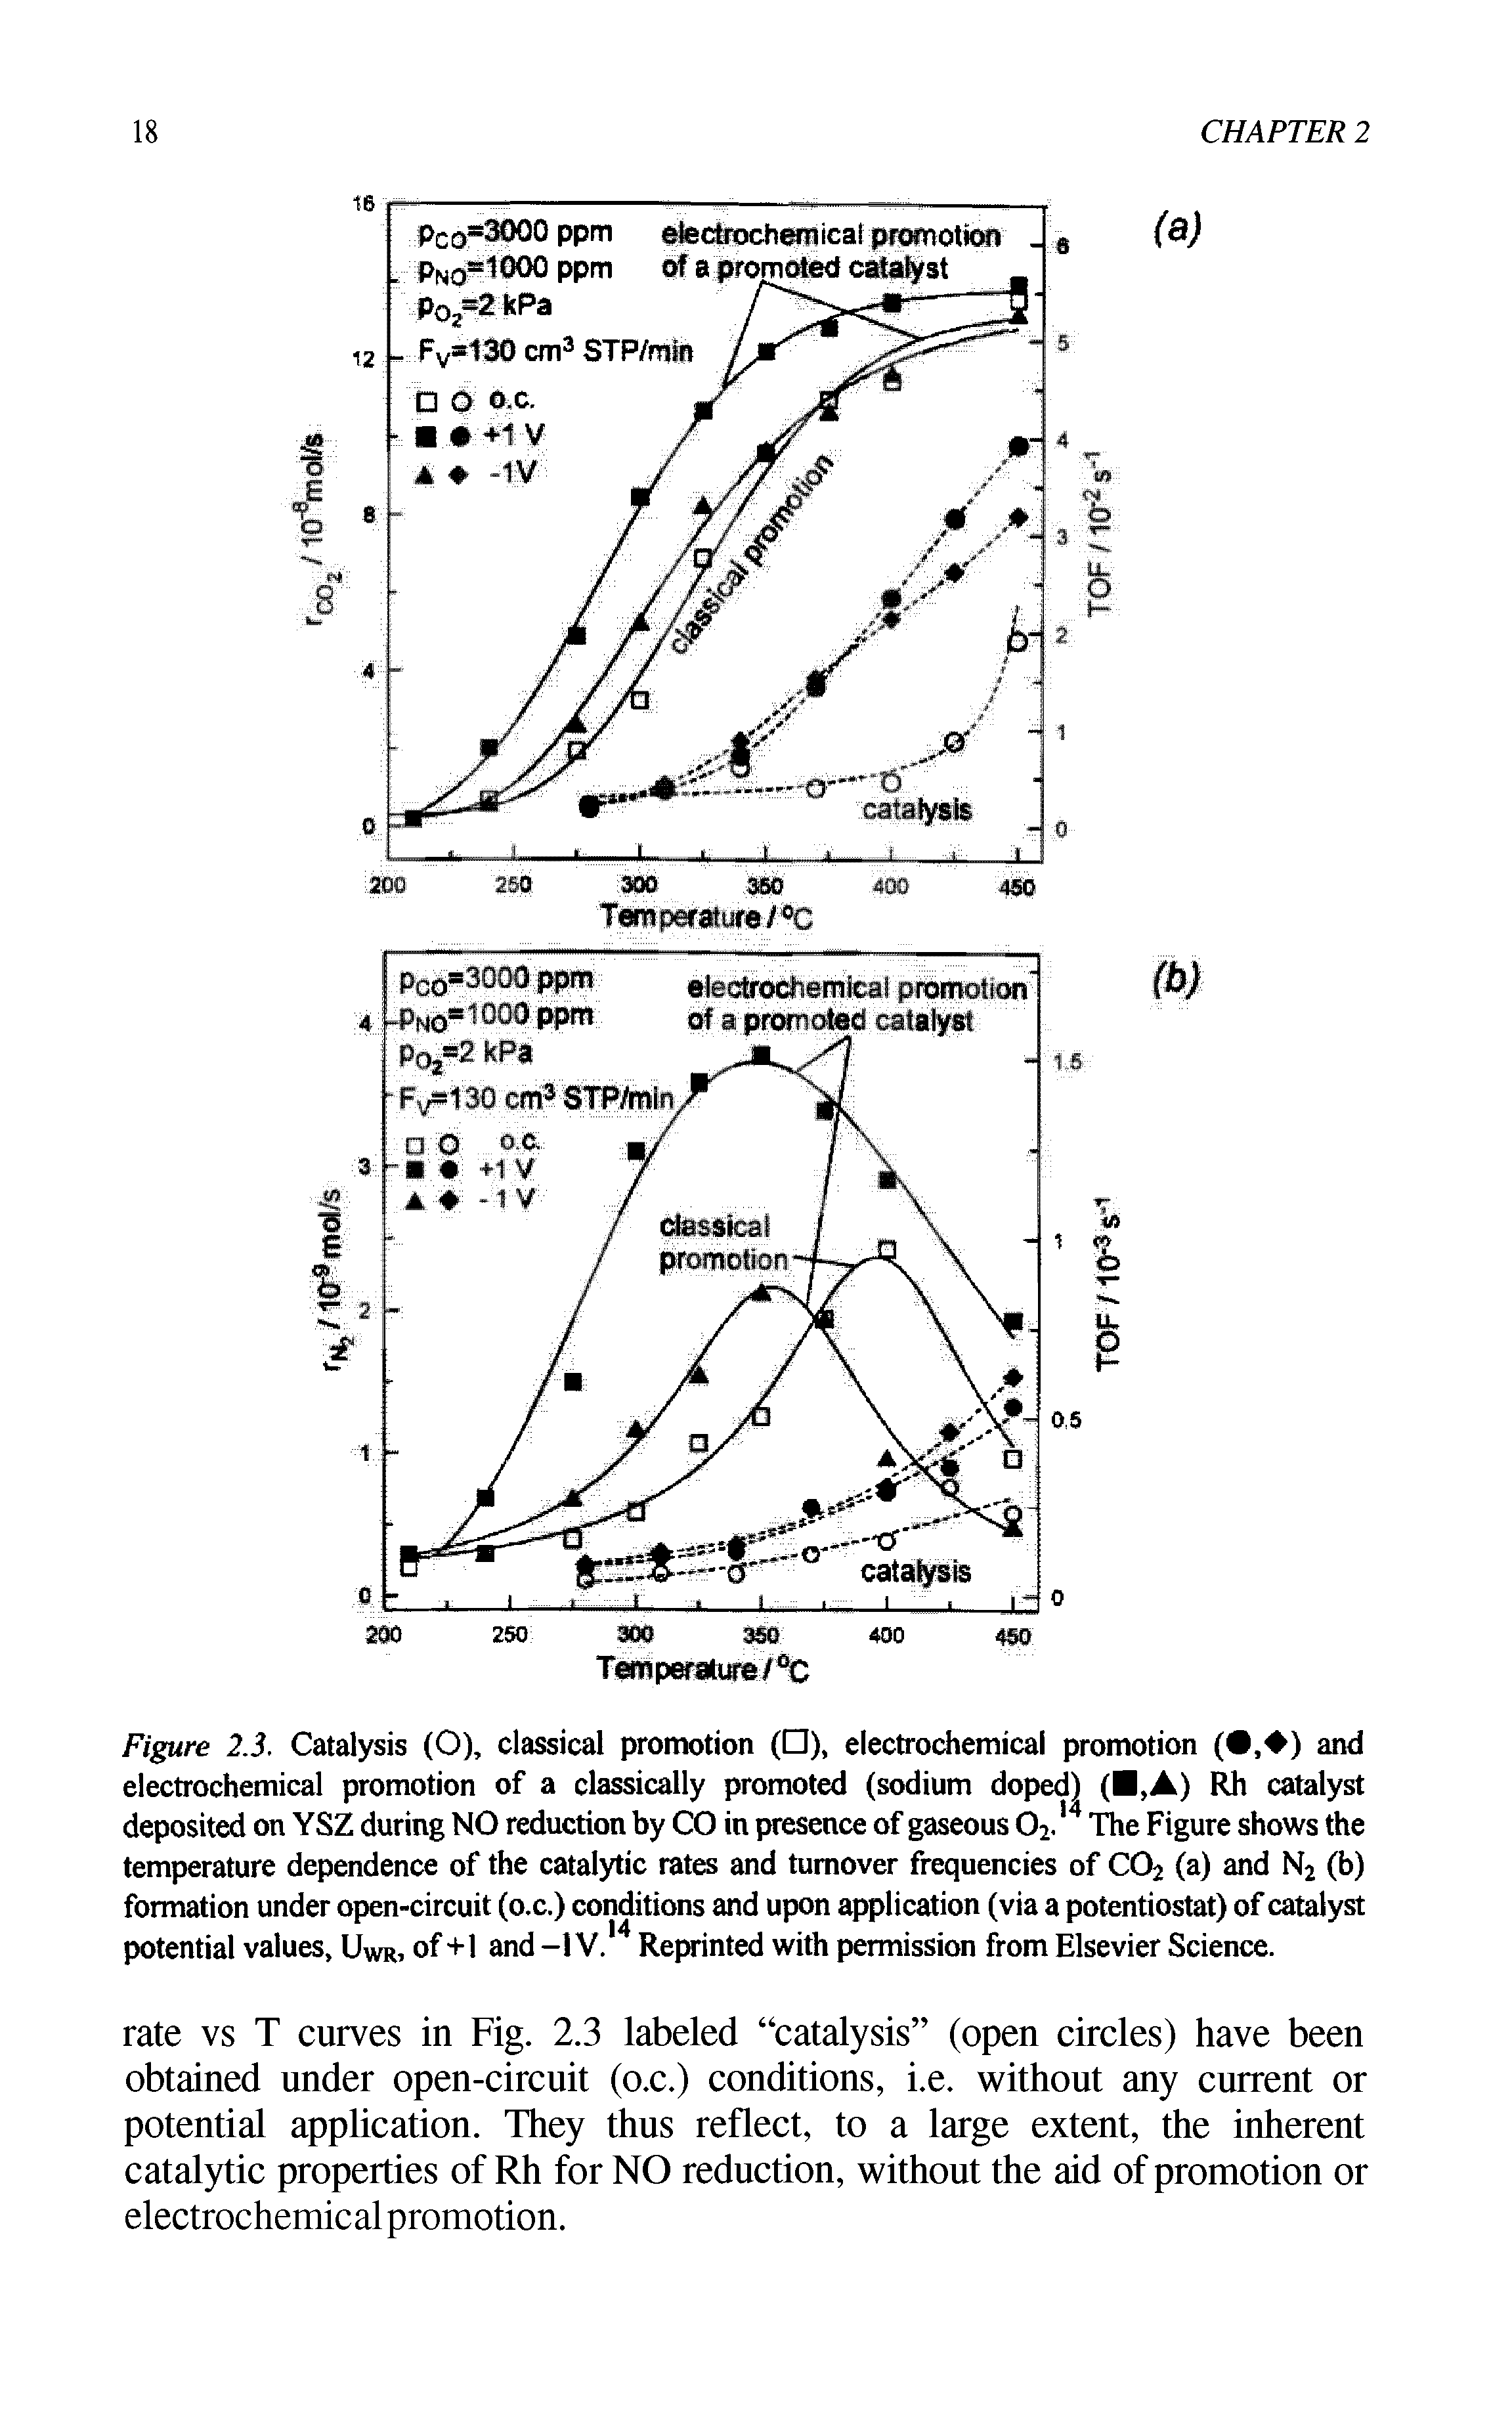 Figure 2.3. Catalysis (0), classical promotion ( ), electrochemical promotion ( , ) and electrochemical promotion of a classically promoted (sodium doped) ( , ) Rh catalyst deposited on YSZ during NO reduction by CO in presence of gaseous 02.14 The Figure shows the temperature dependence of the catalytic rates and turnover frequencies of C02 (a) and N2 (b) formation under open-circuit (o.c.) conditions and upon application (via a potentiostat) of catalyst potential values, UWr, of+1 and -IV. Reprinted with permission from Elsevier Science.